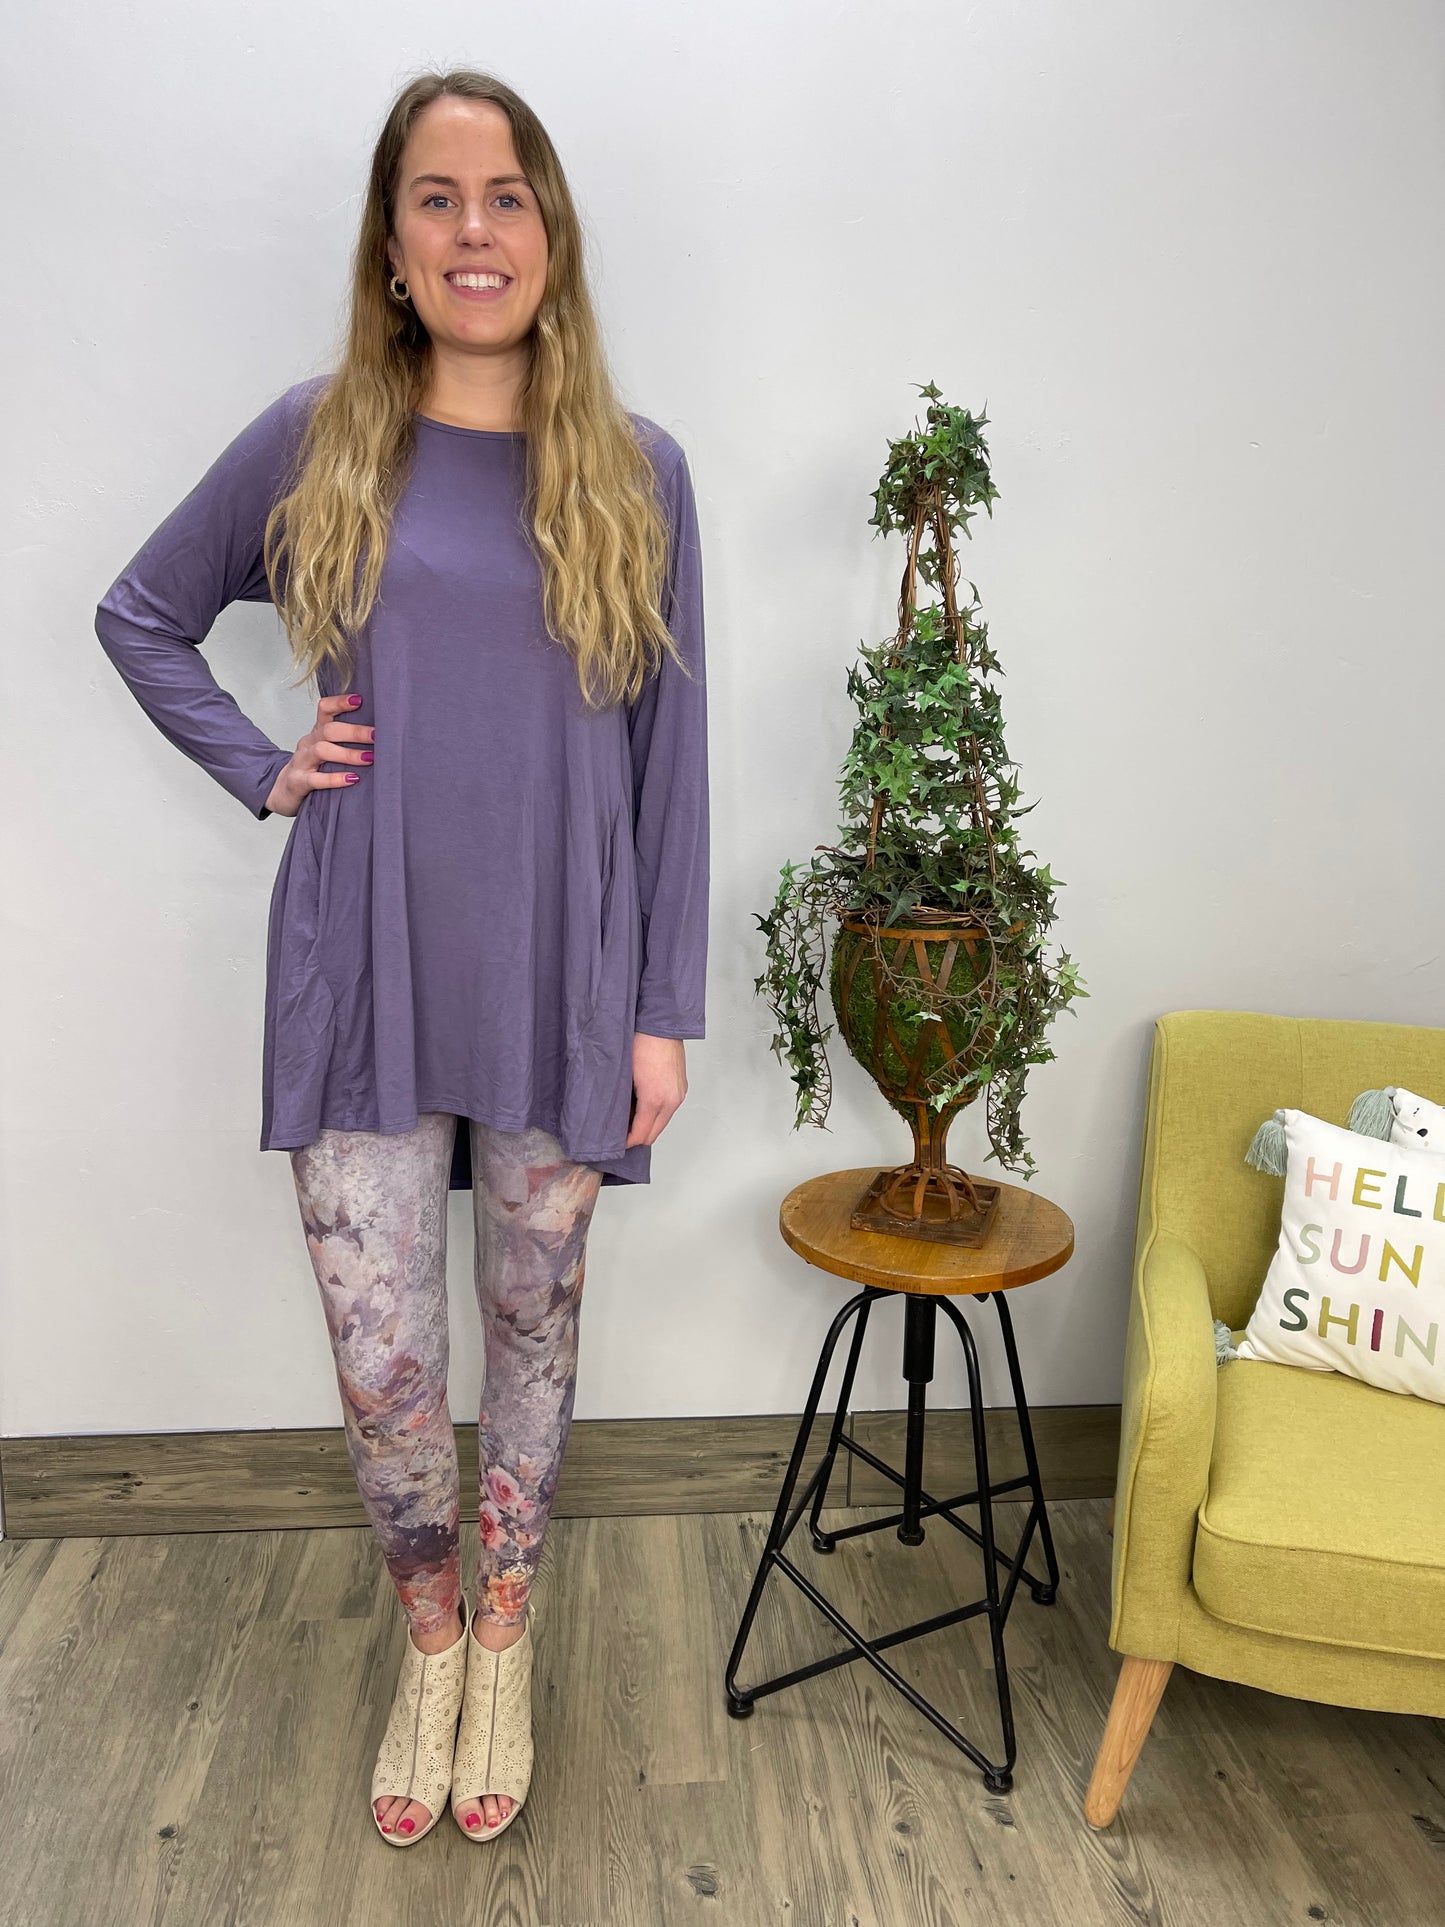 2AM Long Sleeves Tunic - Periwinkle